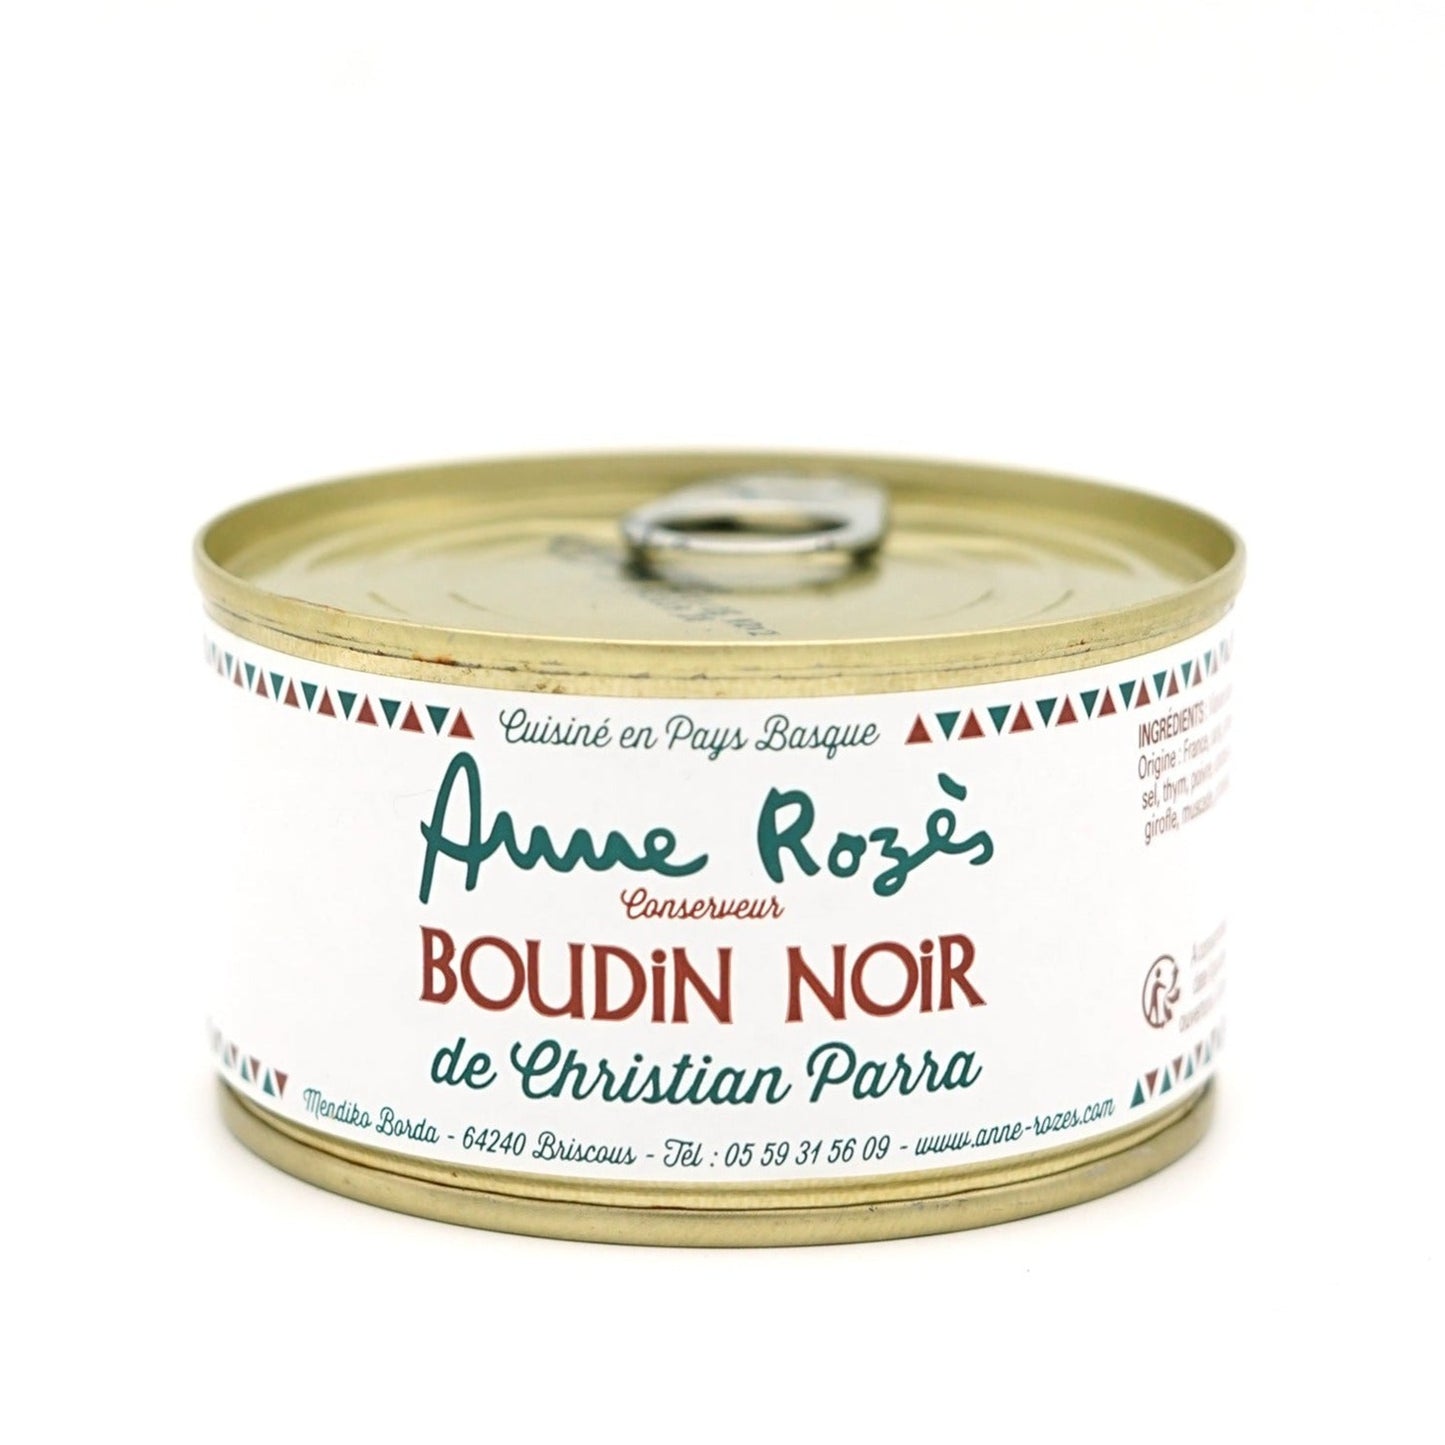 Black Pudding Spread - Anne Rozes - SOLD OUT